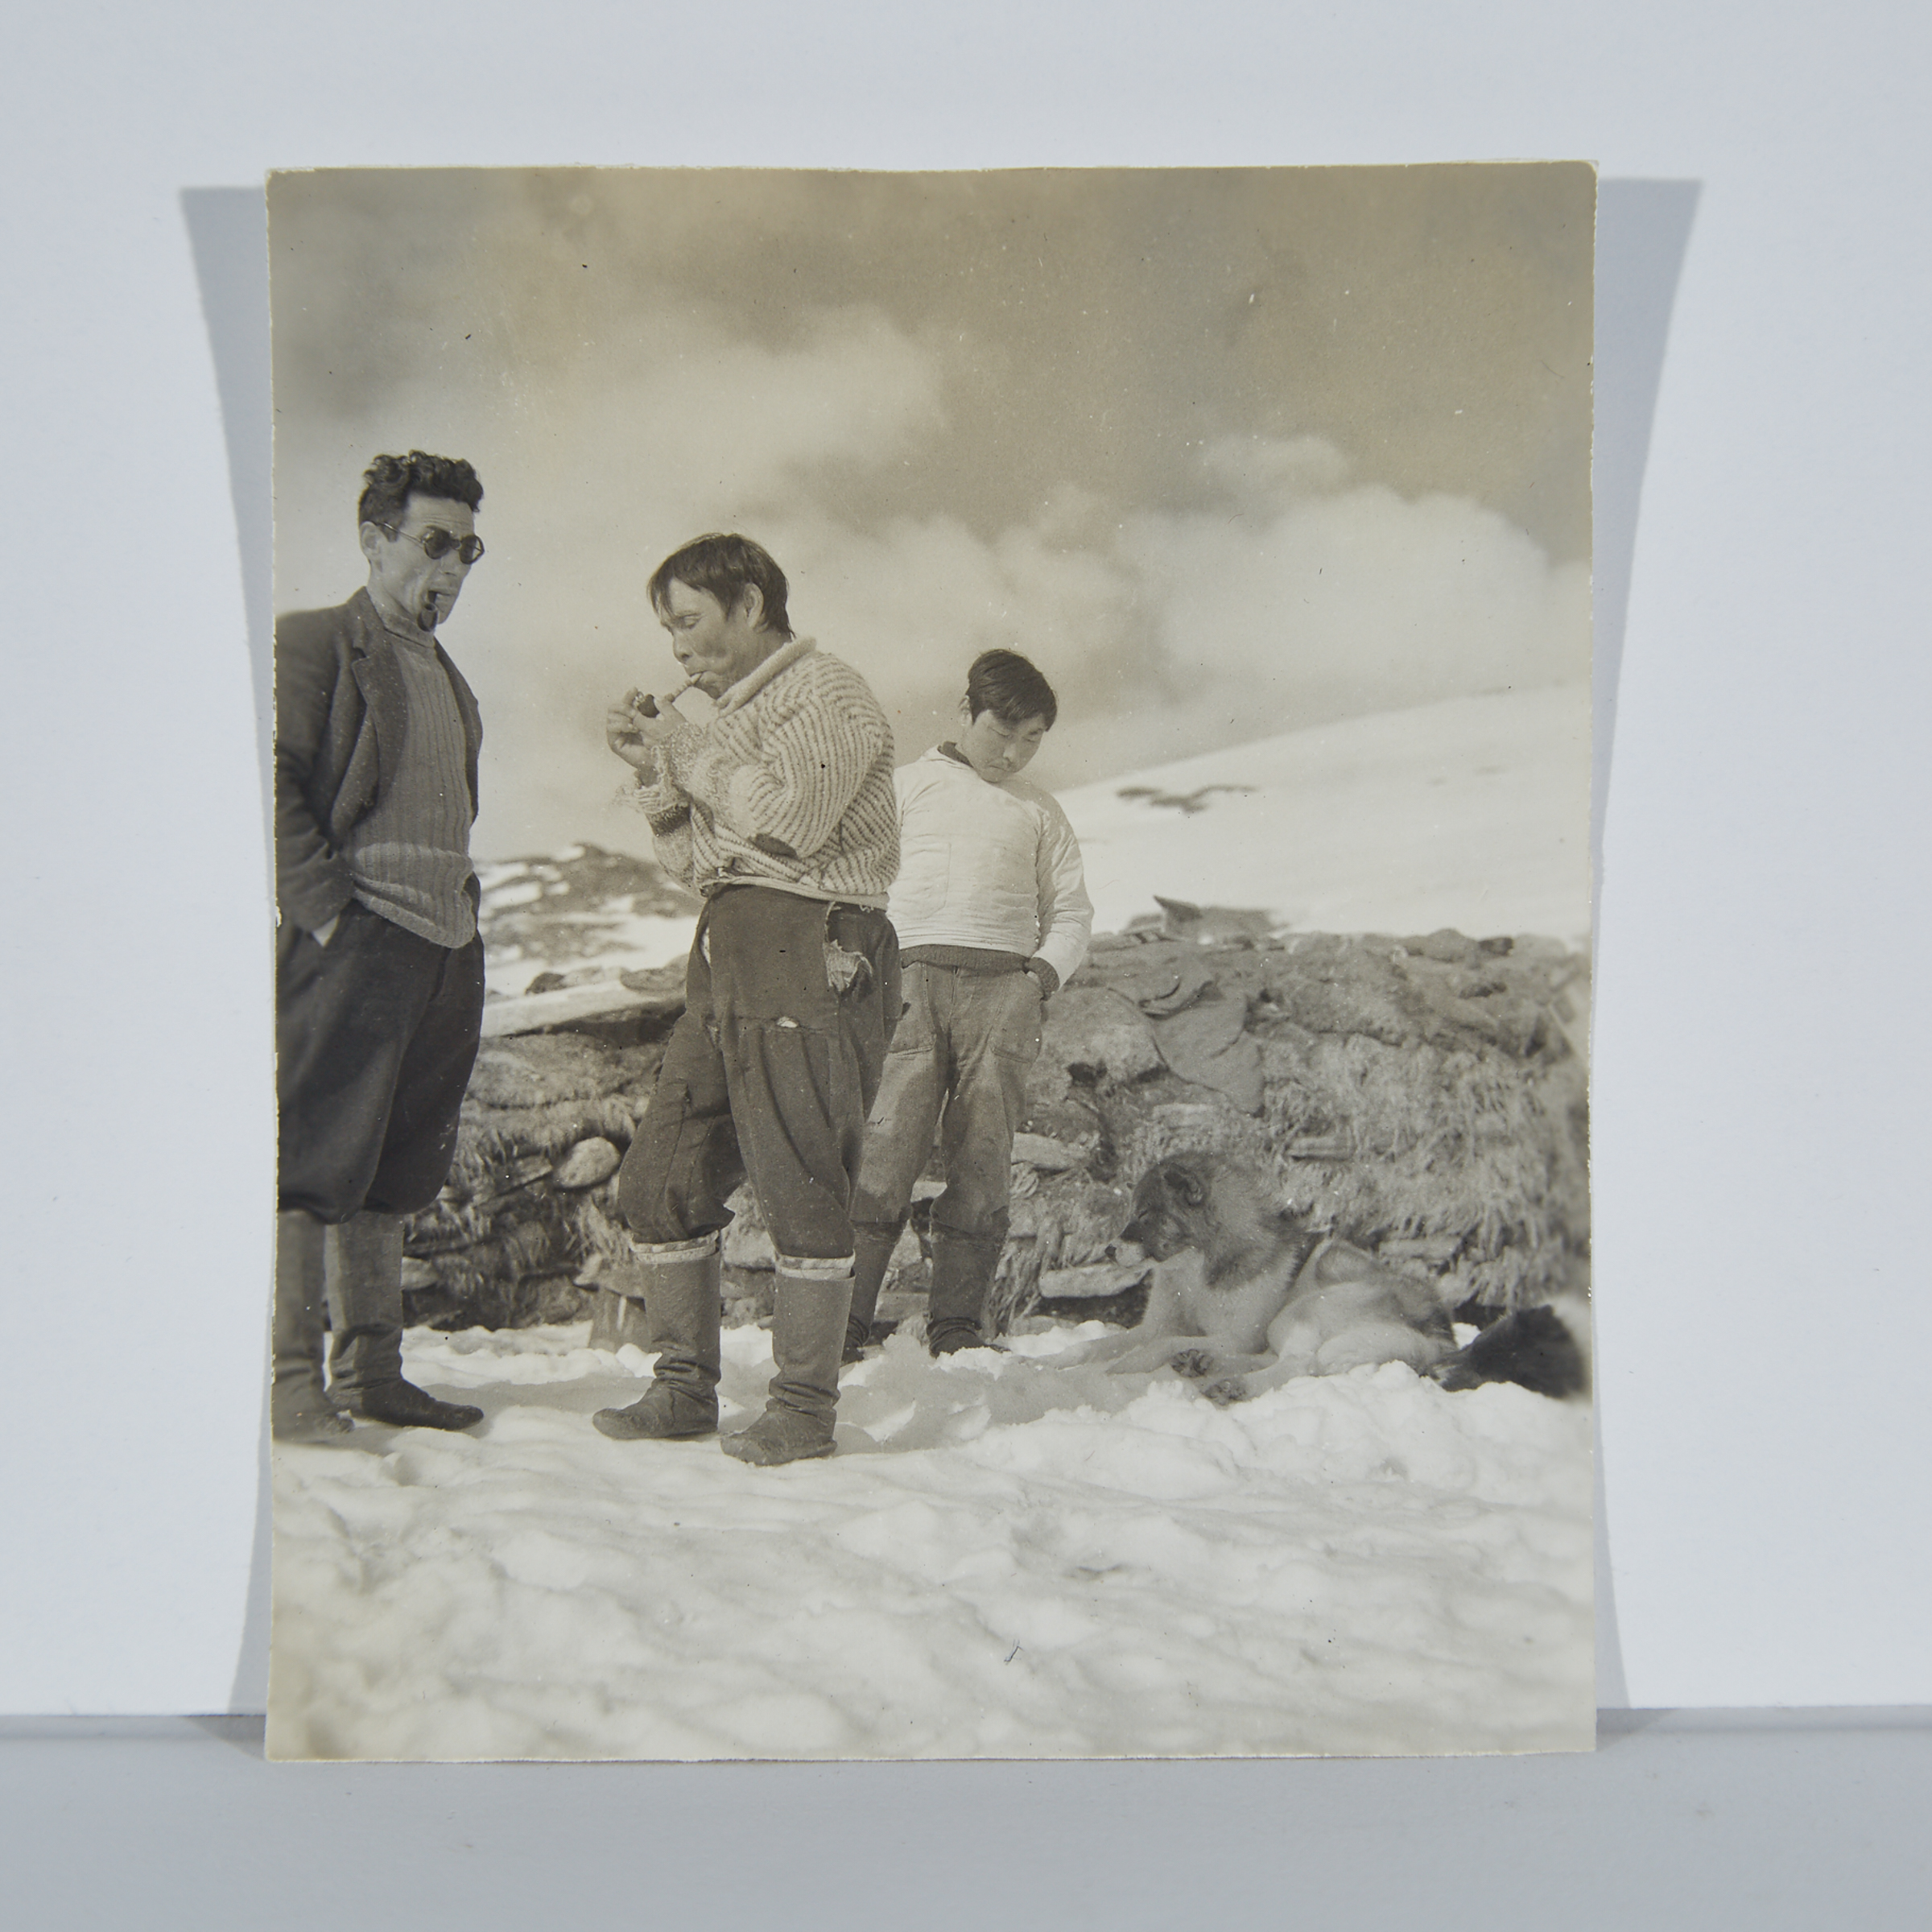 Eight WWII Era Photographs of Inuit Canadians, mid 20th century